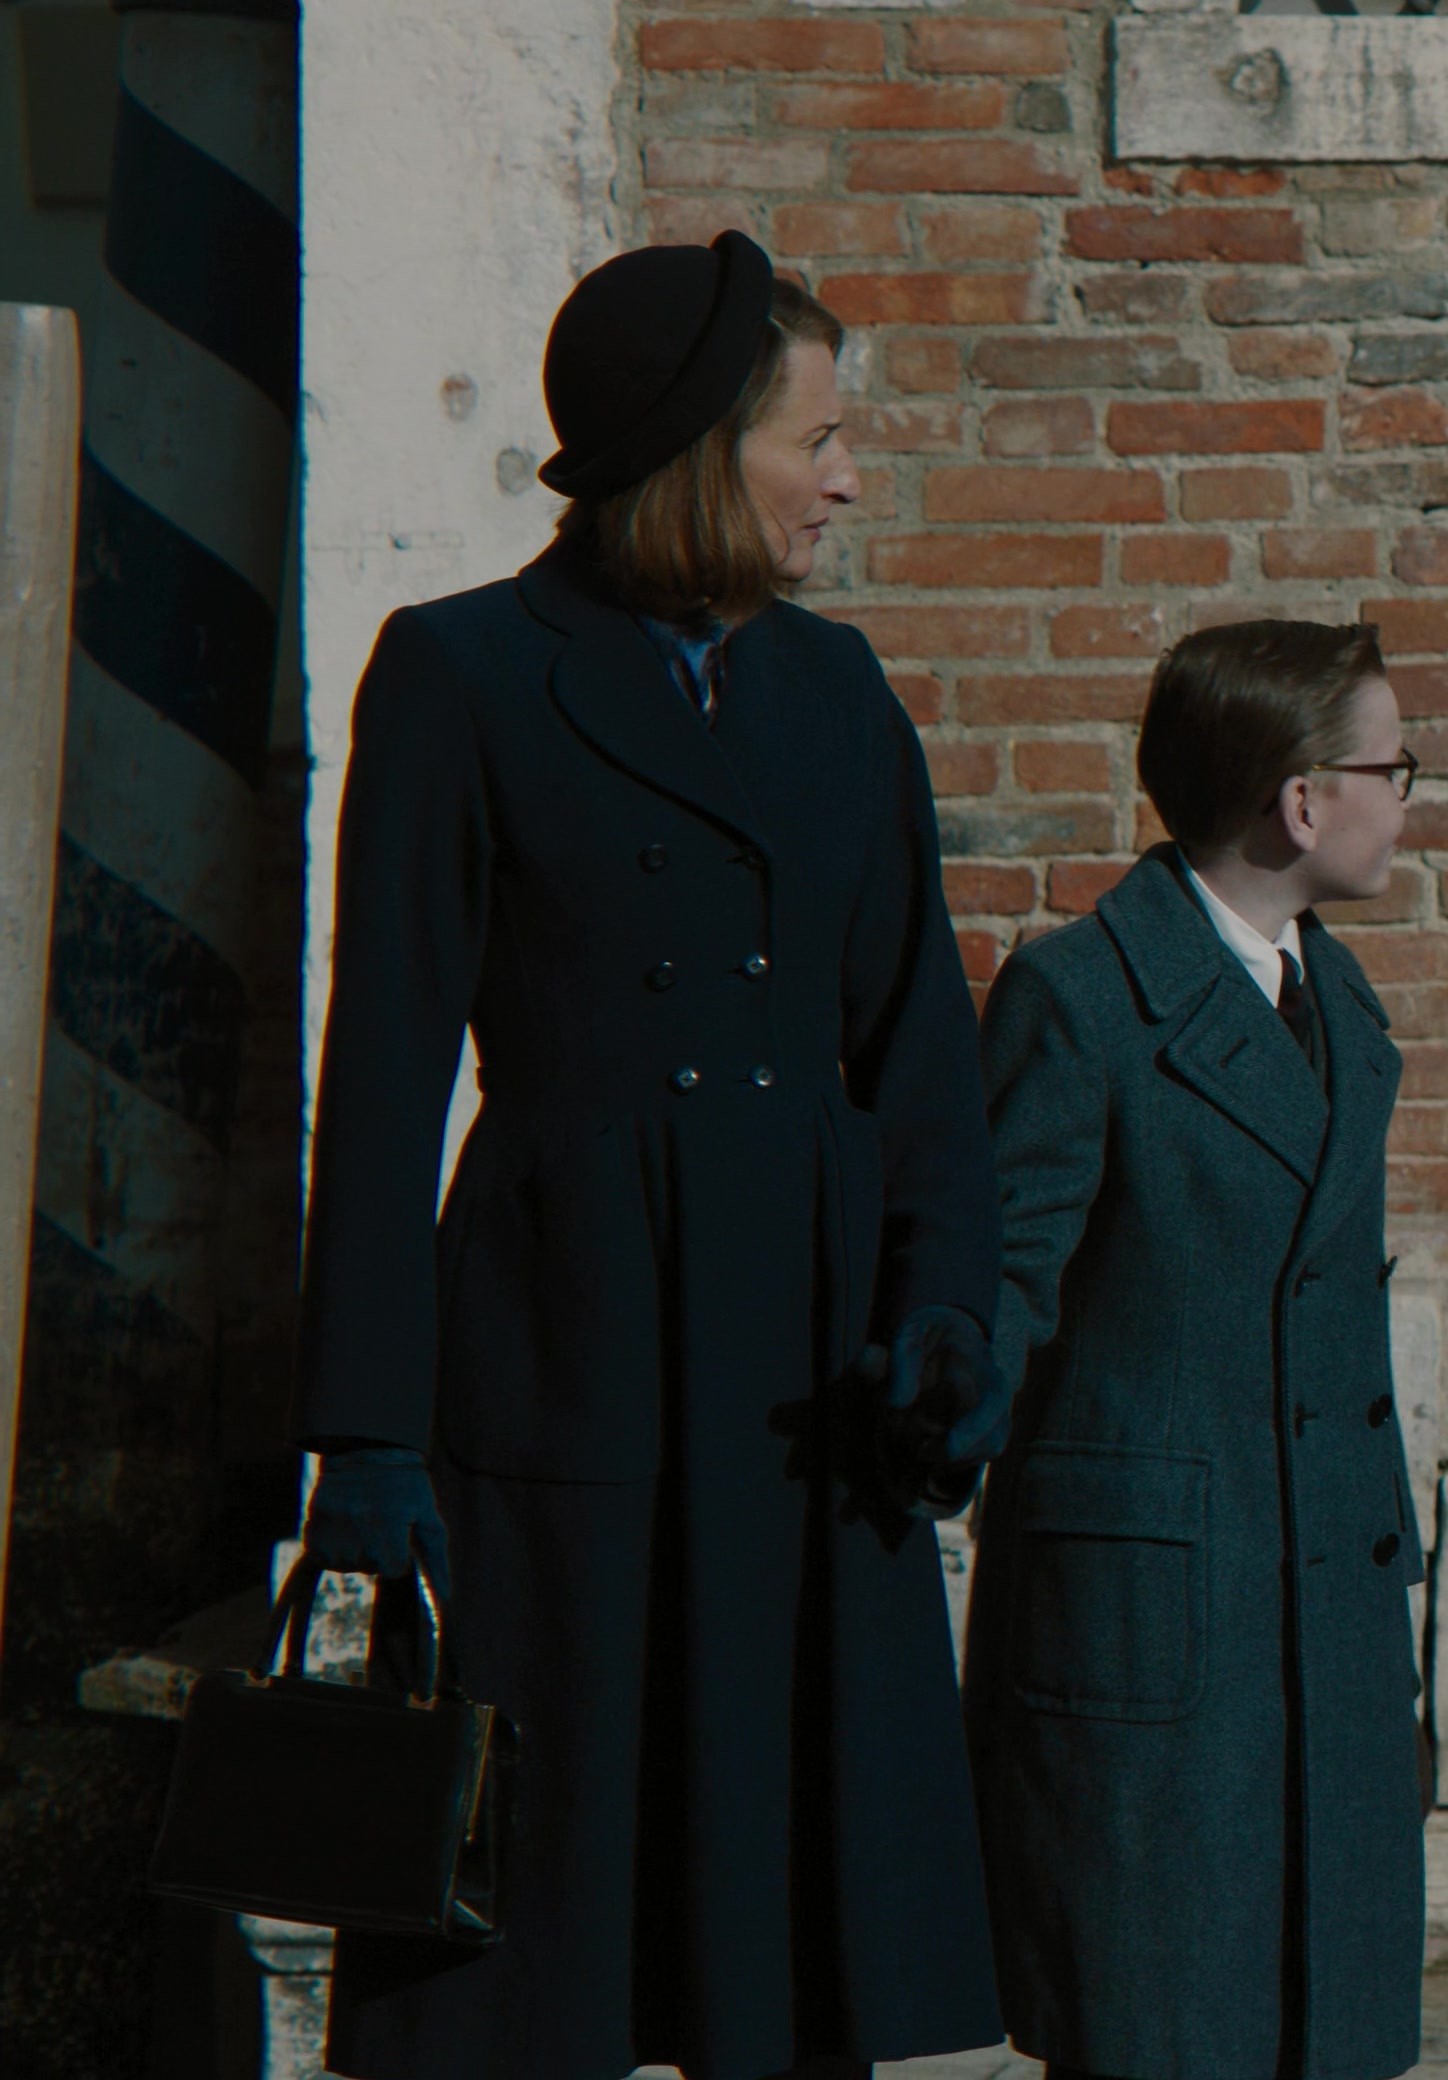 Worn on A Haunting in Venice (2023) Movie - Navy Double-Breasted Coat with Peak Lapels Worn by Camille Cottin as Olga Seminoff